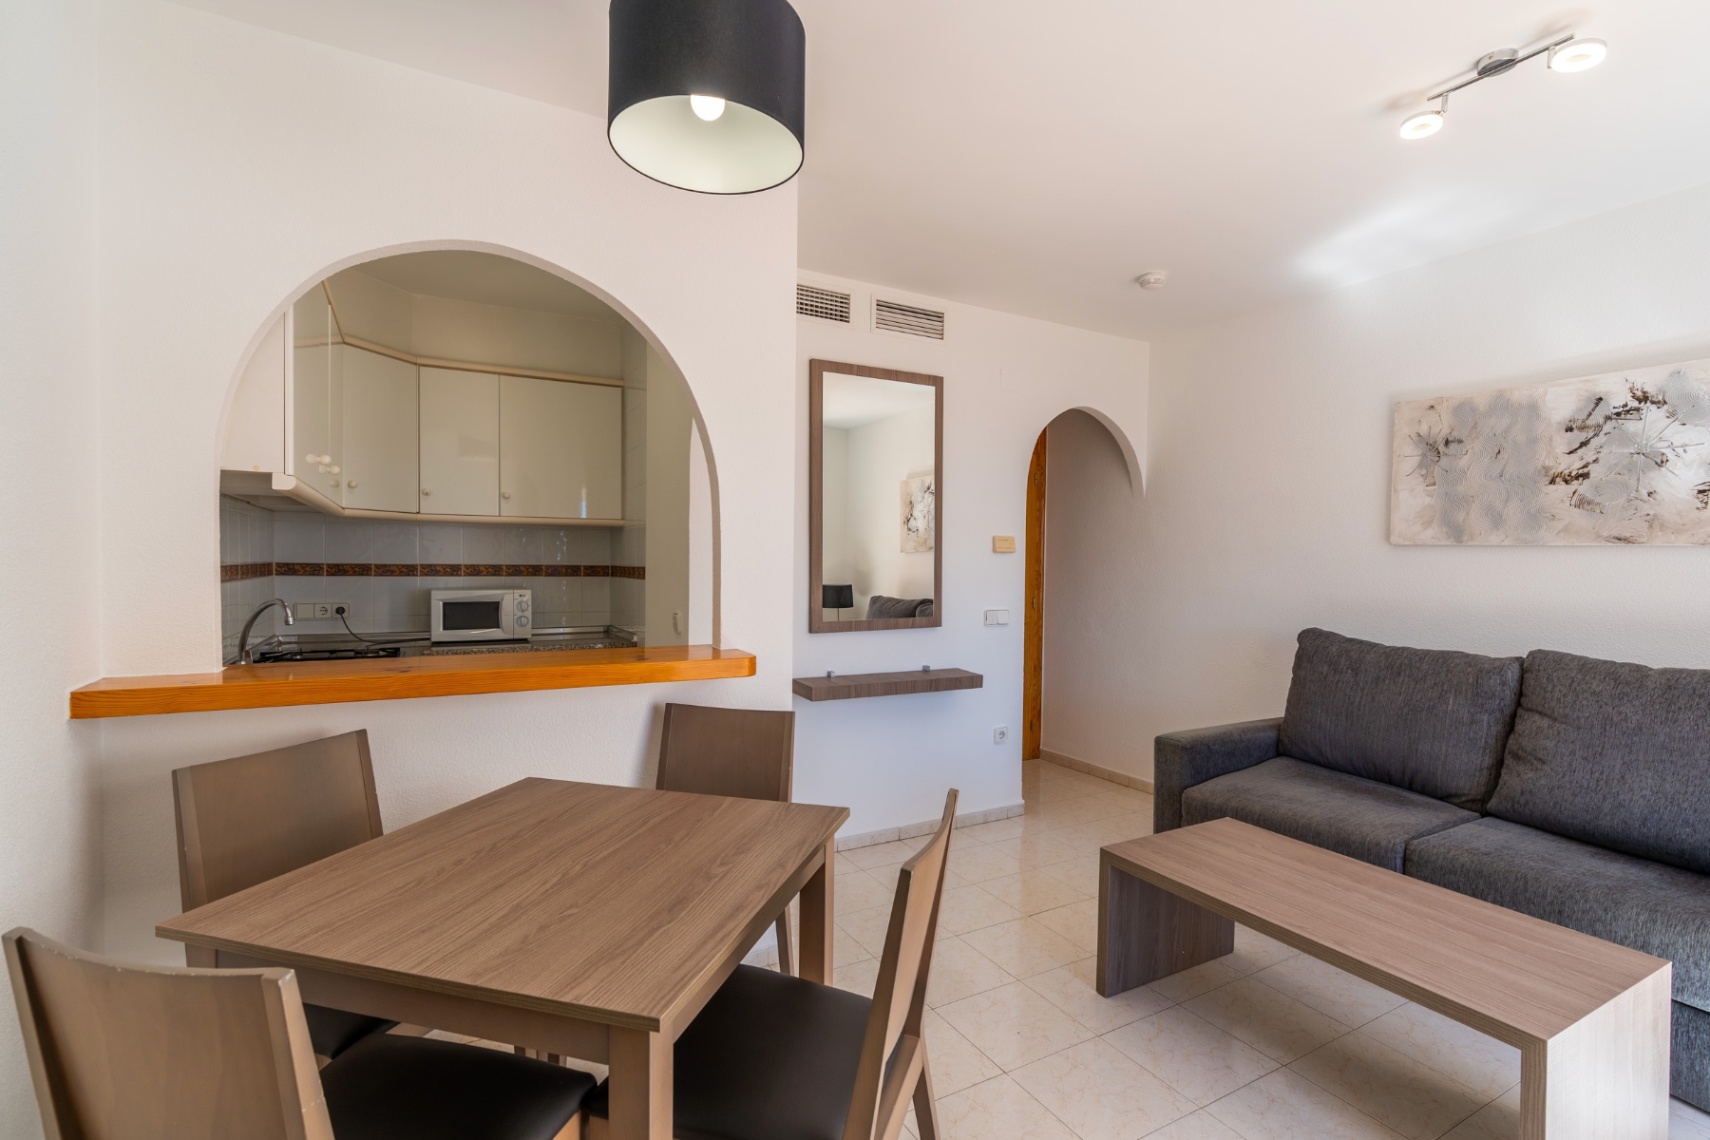 1 bedroom apartment for sale in Imperial Park Calpe, Costa Blanca